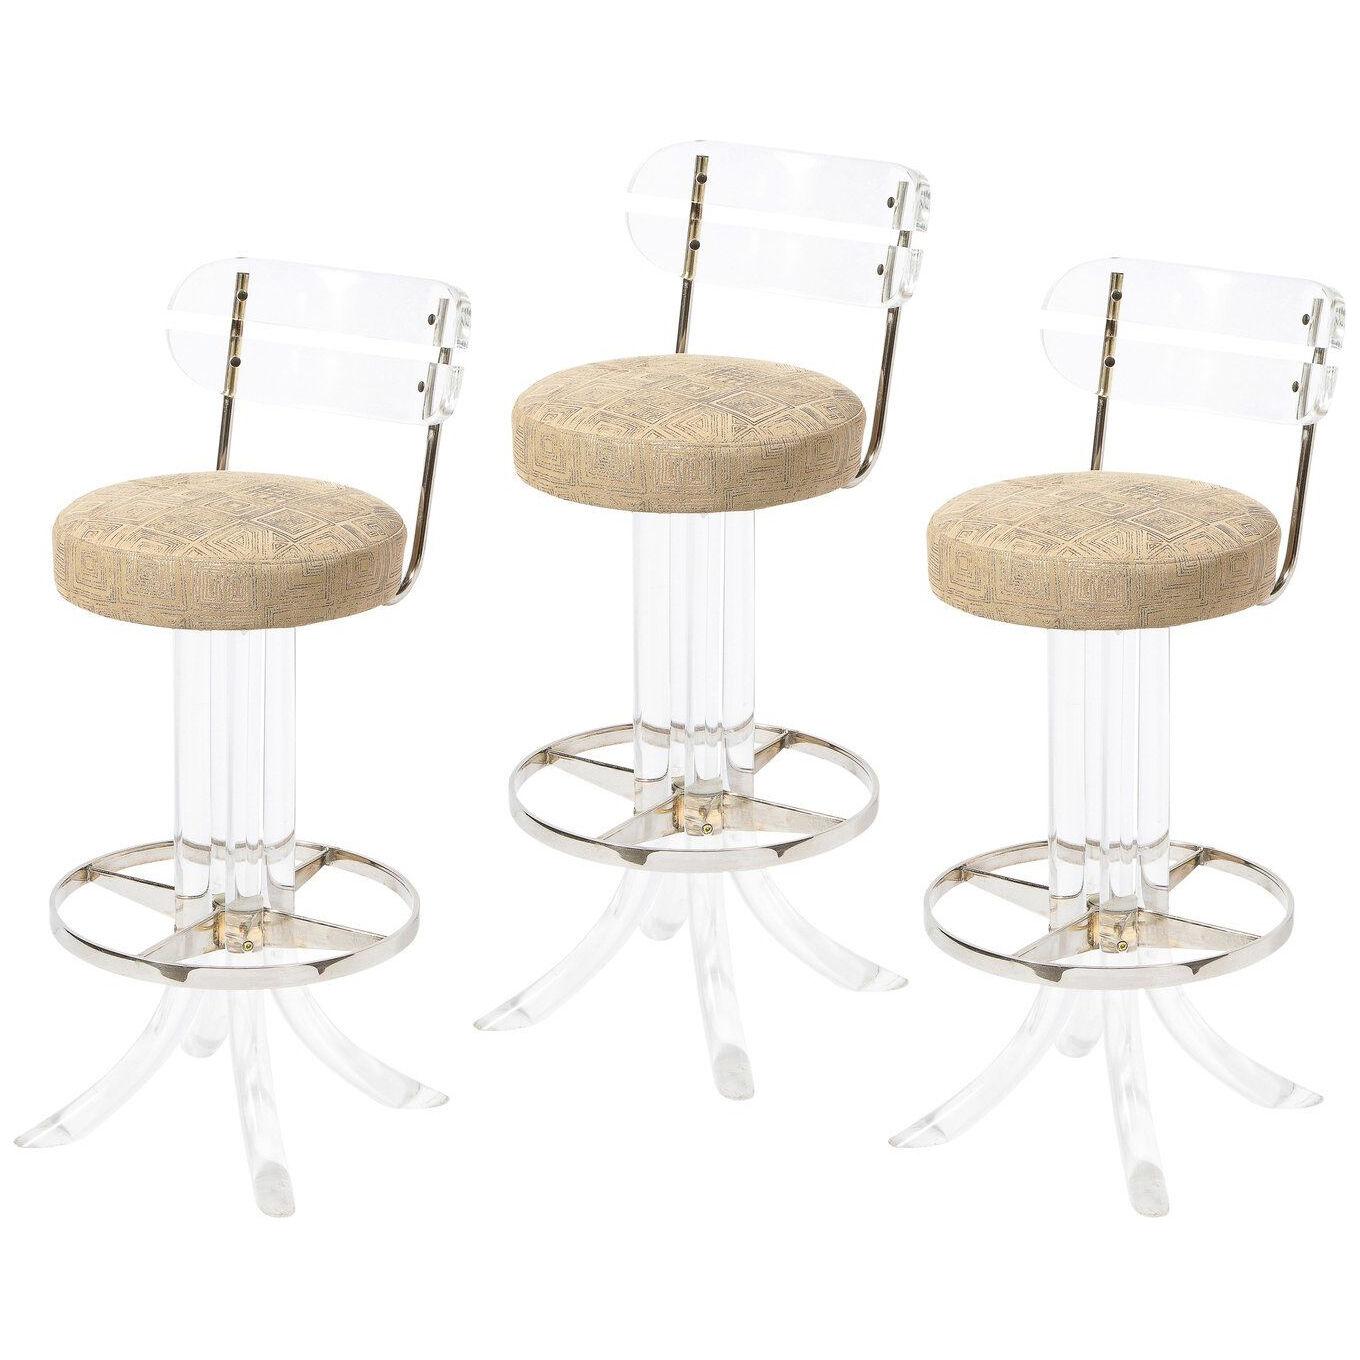 Set of 3 Mid-Century Modern Lucite Bar Stools by Charles Hollis Jones for Hills